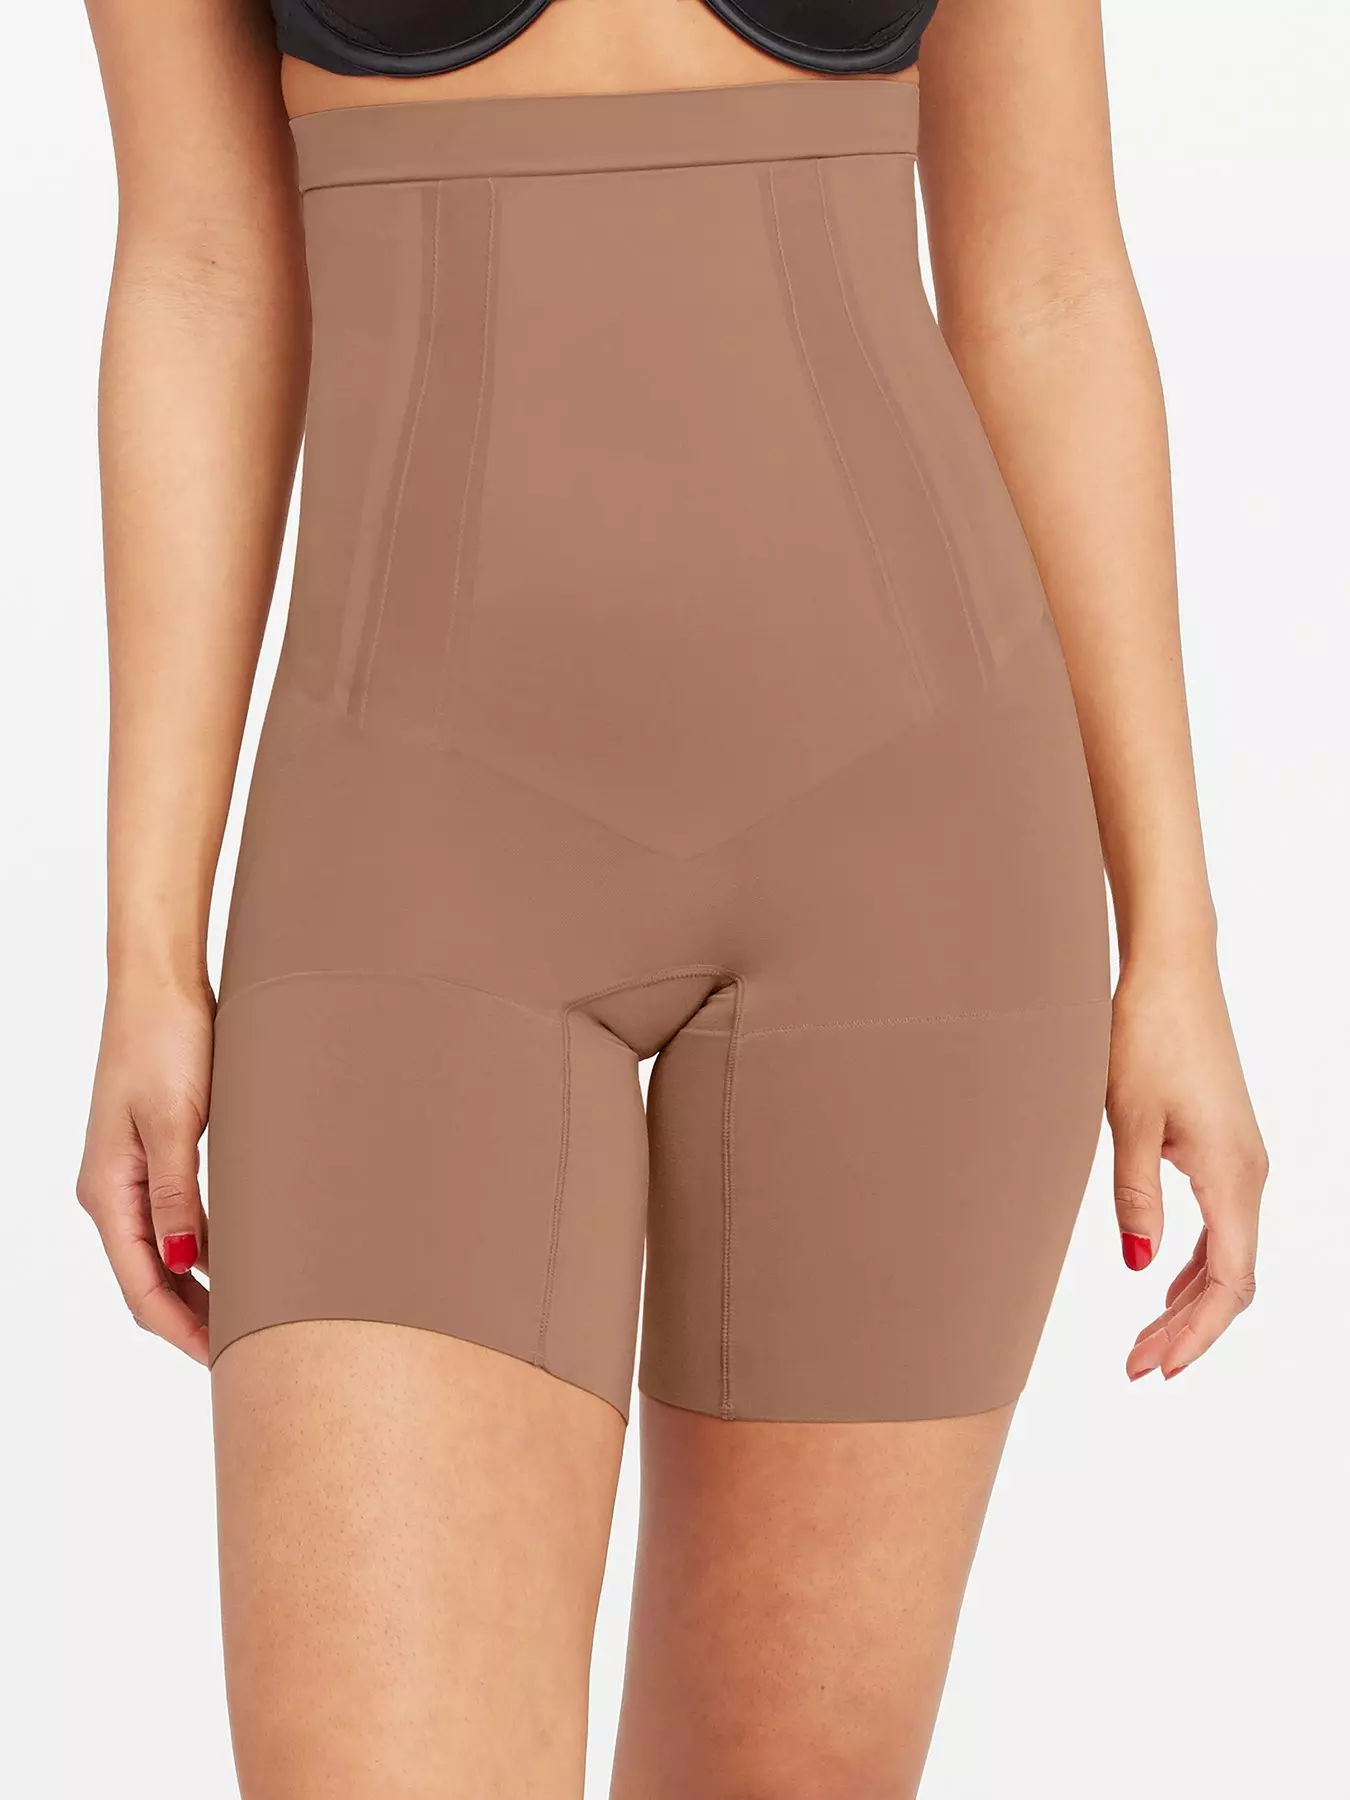 Skinnygirl Smoothers & Shapers Ultra Smooth Thigh Shaper In Tan